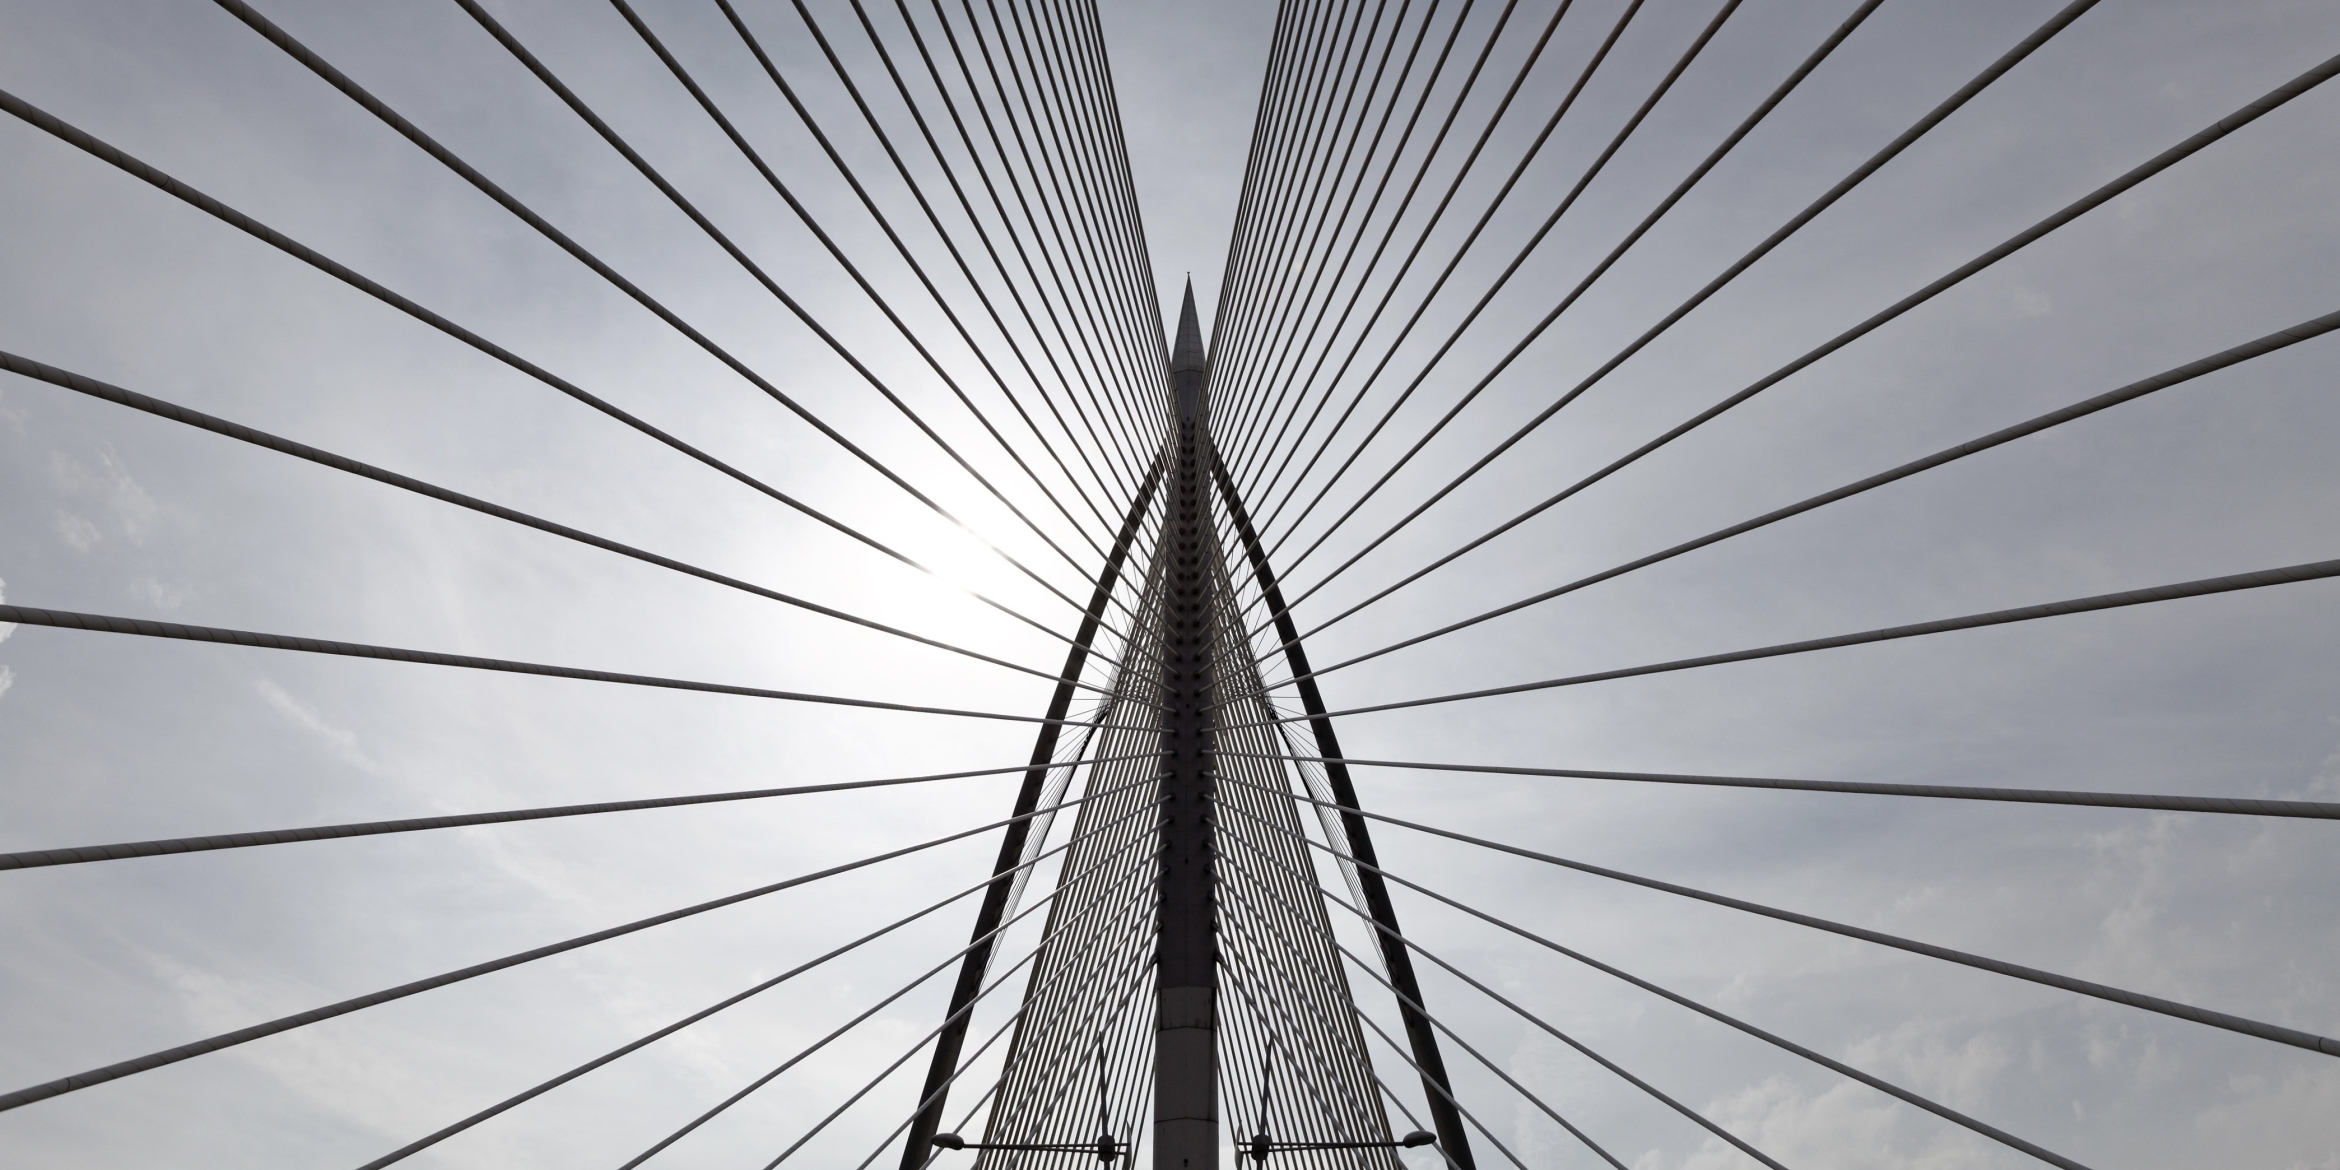 The symmetrical pattern of a cable-stayed bridge from below.